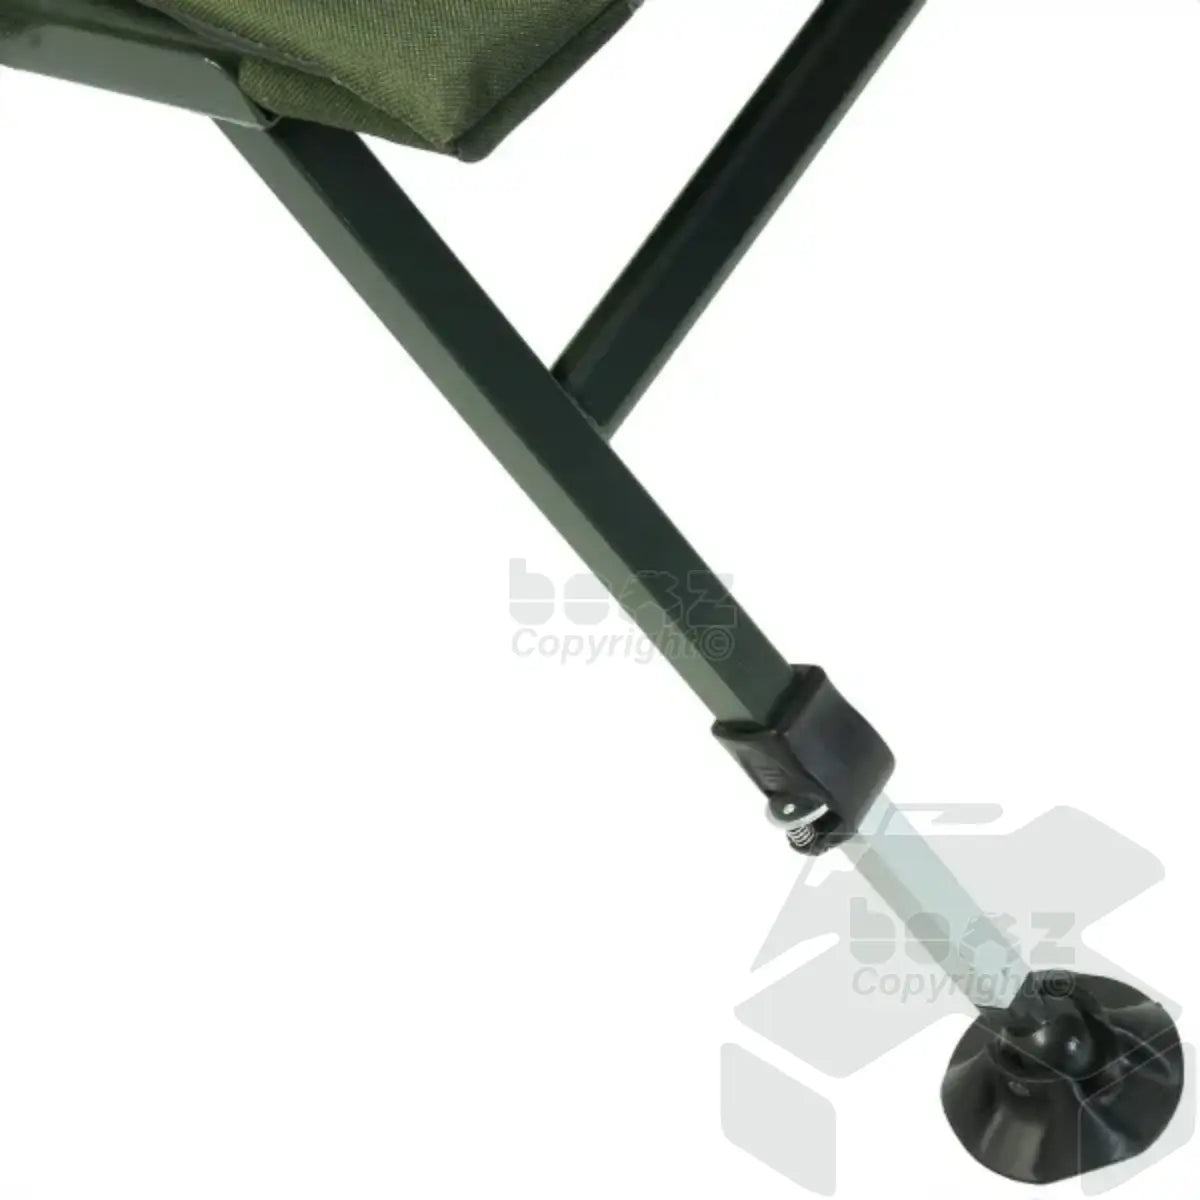 NGT XPR Chair - Adjustable Legs and Arm Rests